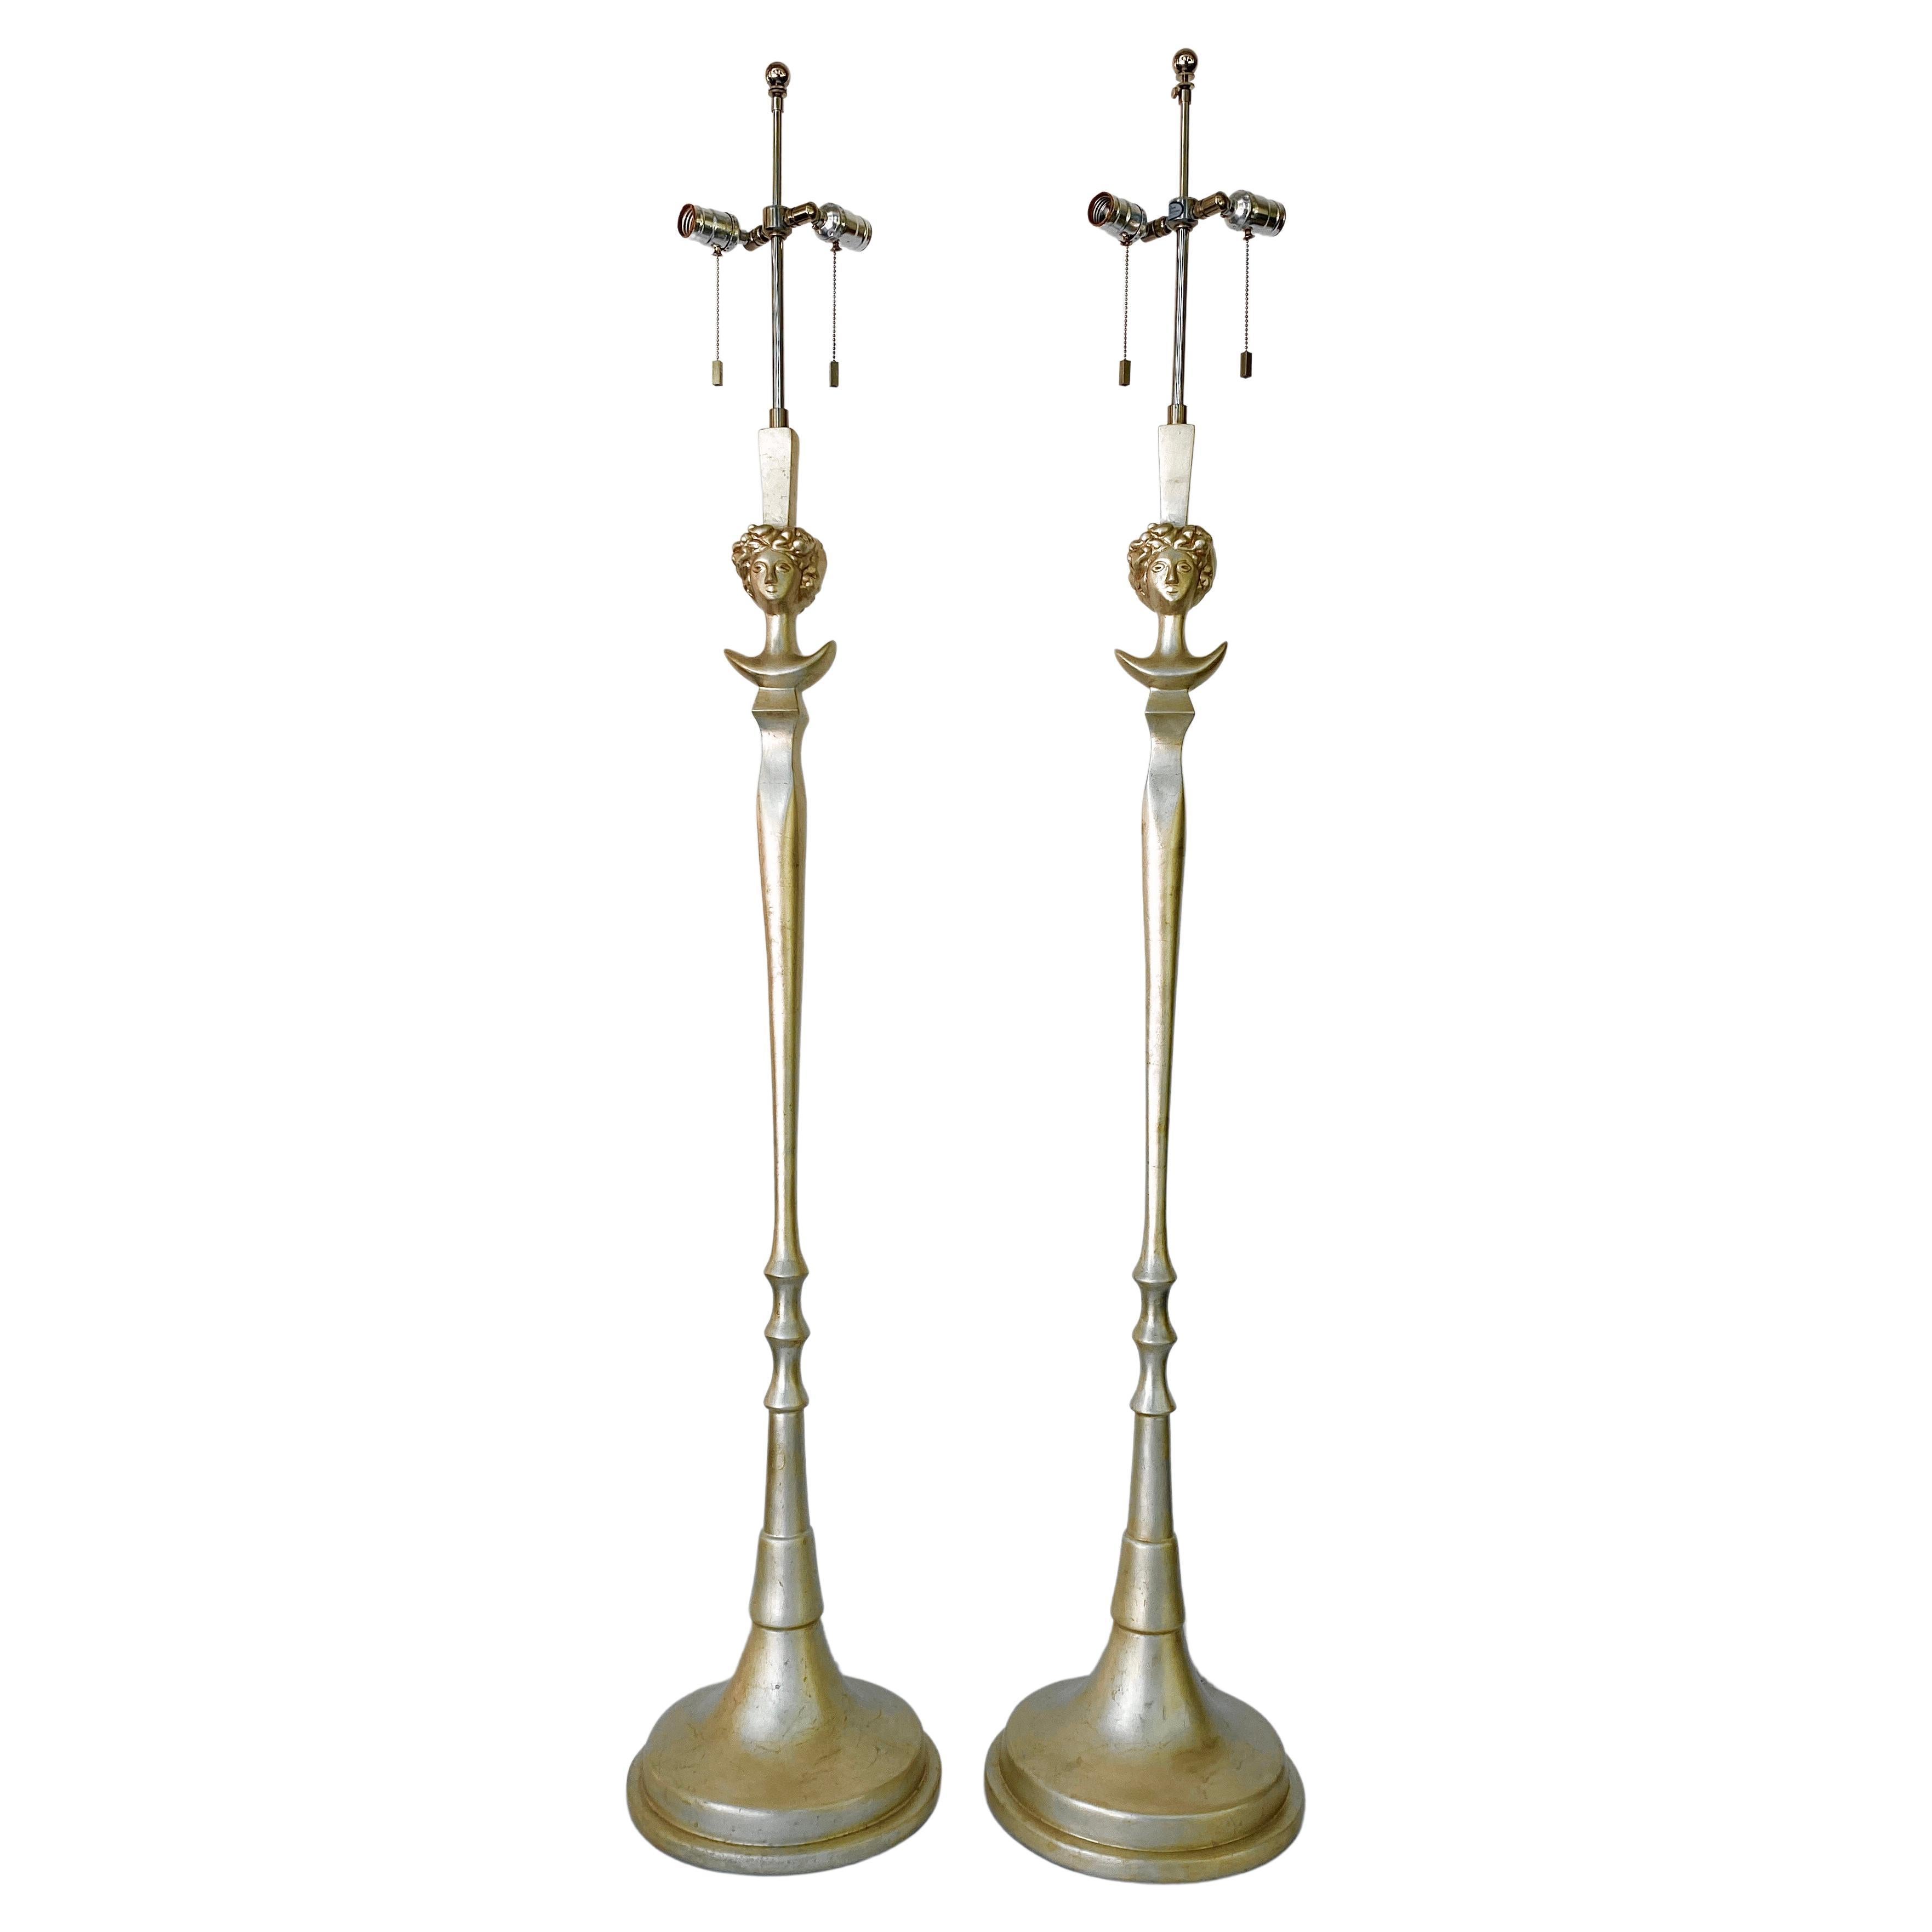 Pair of Colette Silver Leaf Diego Giacometti Style Floor Lamps by Sirmos For Sale